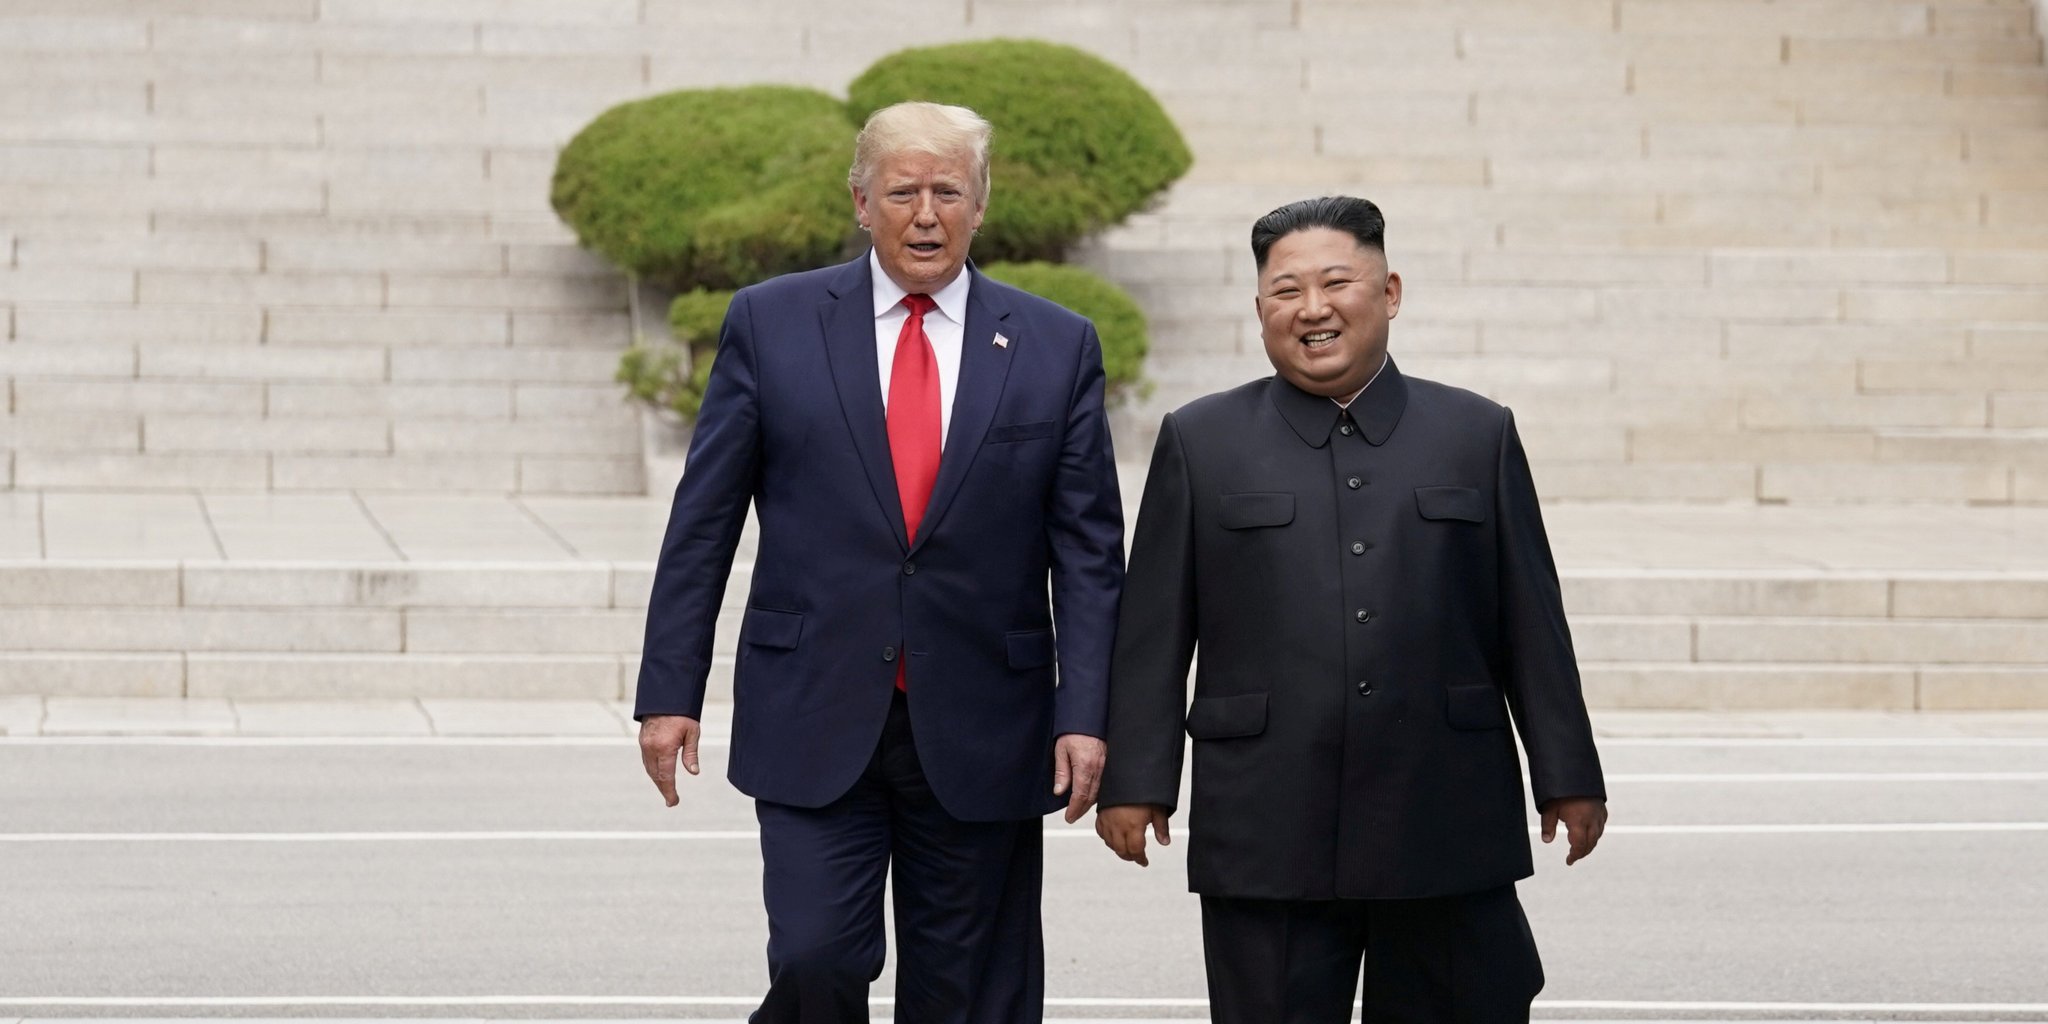 Kim Jong Un told Trump their friendship would 'work as a magical force' in personal 'love letters,' new Woodward book says